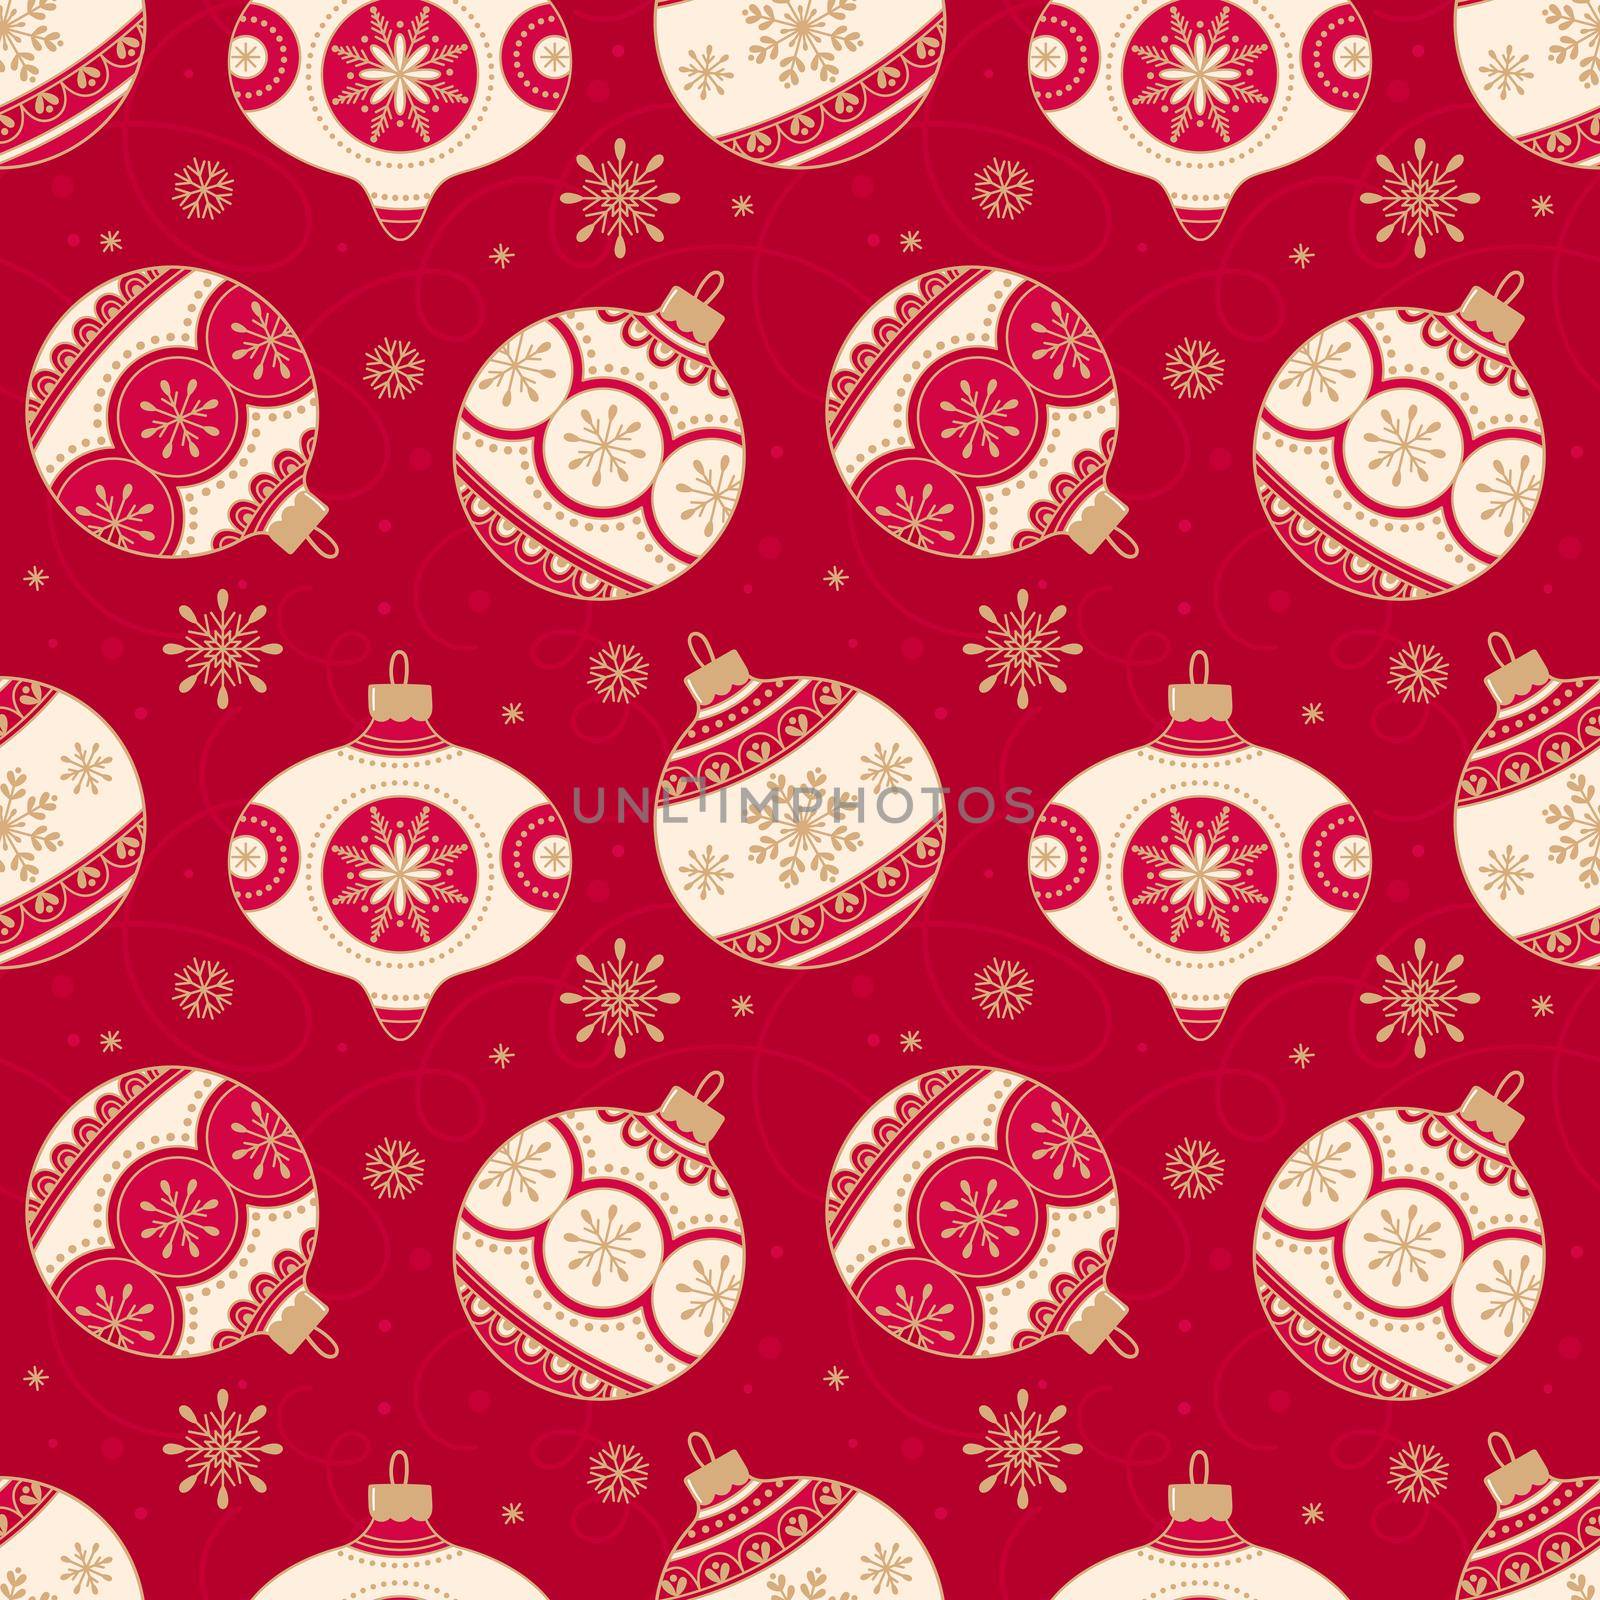 Seamless Christmas pattern with Christmas balls on a red background. by Lena_Khmelniuk